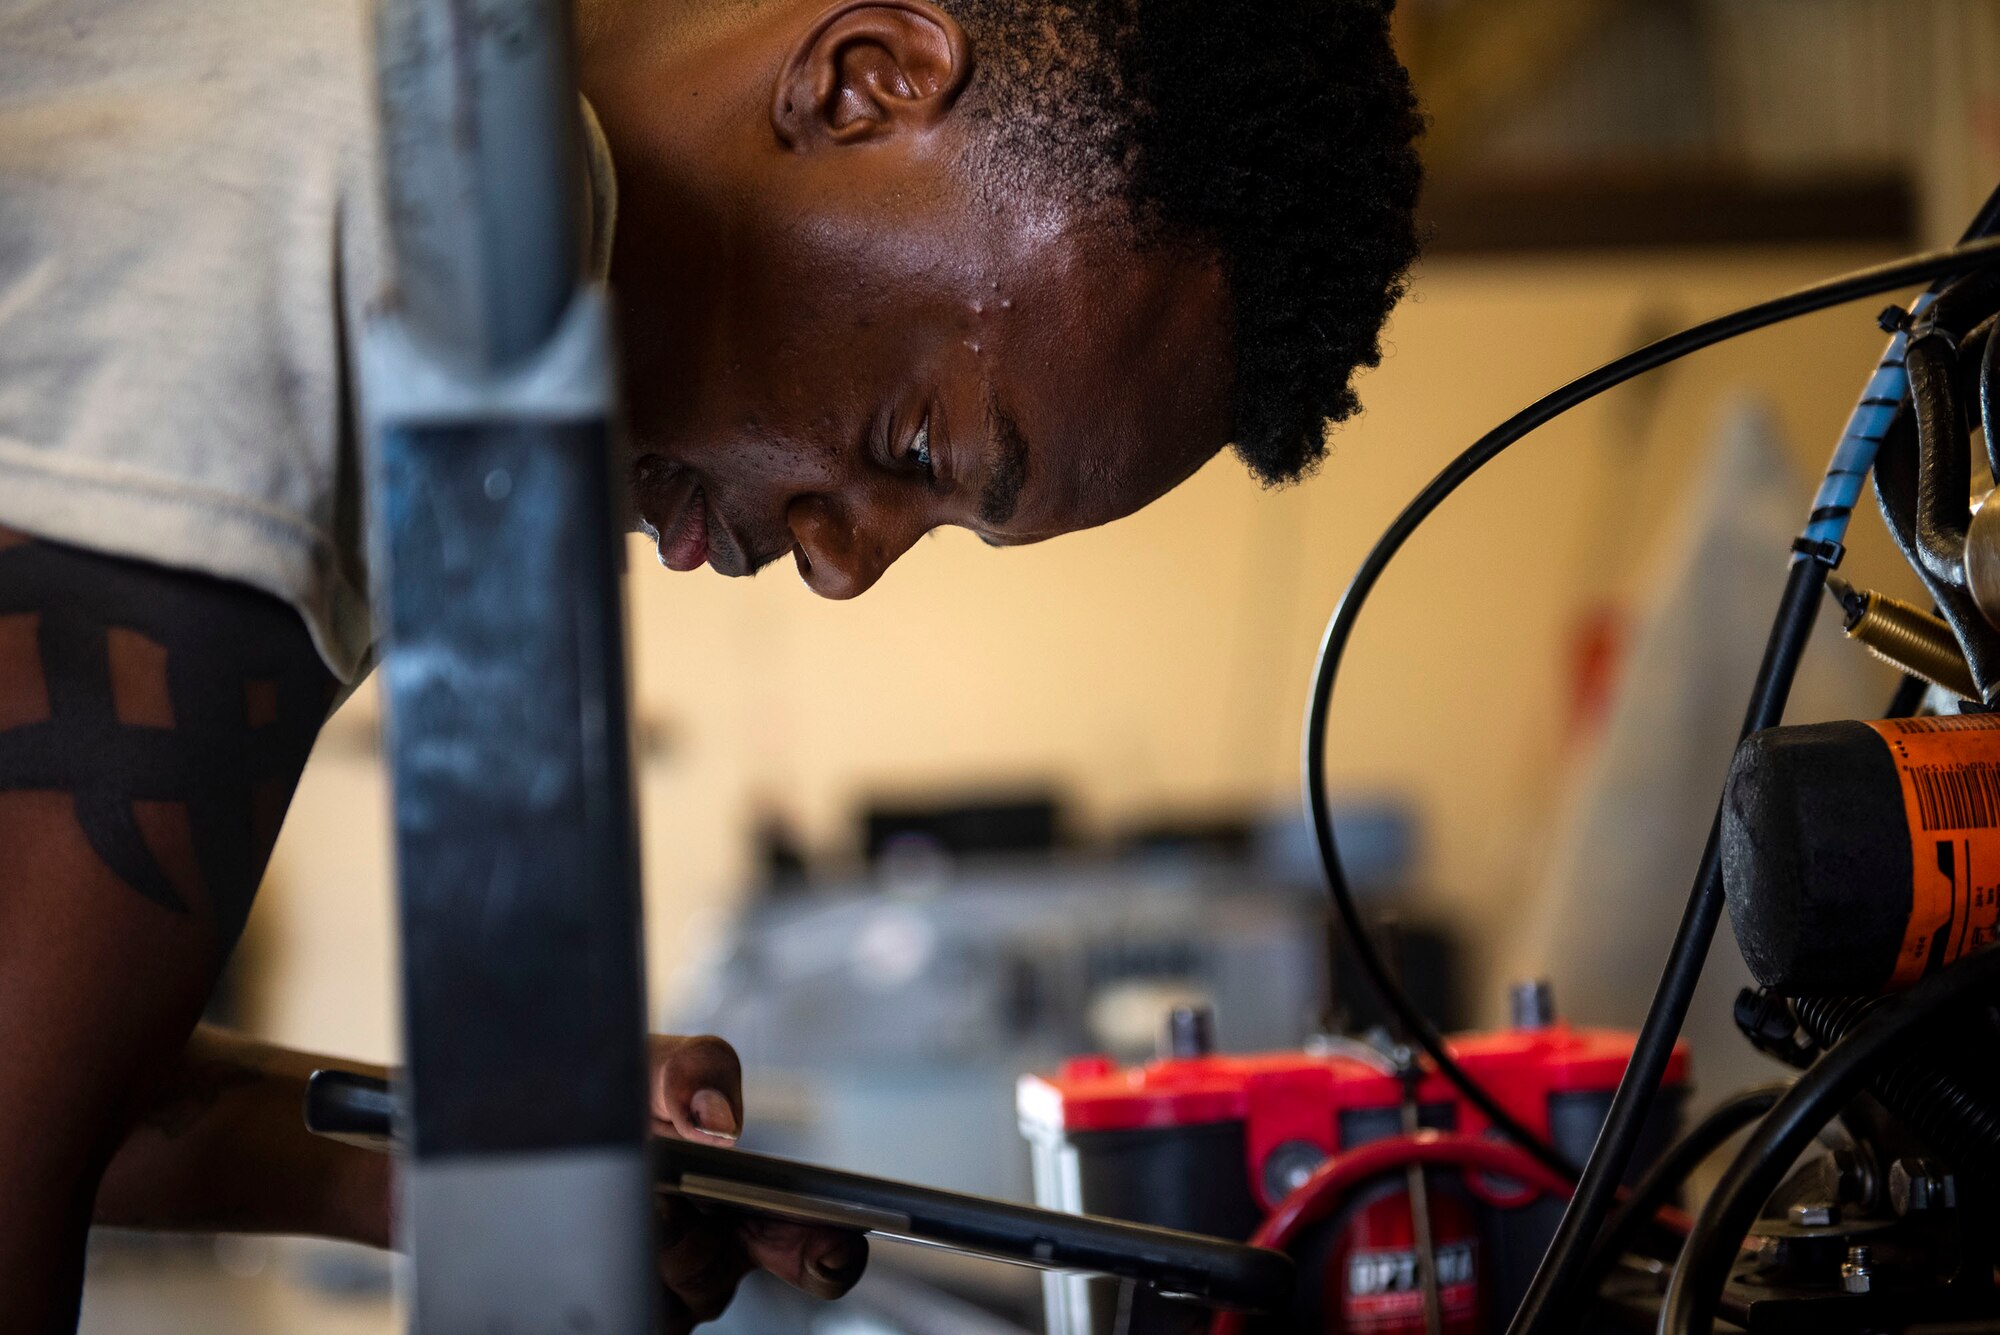 Airman 1st Class Davon Frazier, 23d Maintenance Squadron aerospace ground equipment (AGE) journeyman, examines technical orders while repairing a self-generating nitrogen servicing cart, June 21, 2019, at Moody Air Force Base, Ga. AGE maintains the equipment needed to repair the three airframes in the 23d Wing. To accomplish this, AGE is broken down into three main functions: inspections, maintenance and dispatch. The maintenance section troubleshoots and repairs the equipment the dispatch section can’t readily fix out on the flightline. The maintenance section averages approximately 800 jobs a month. (U.S. Air Force photo by Senior Airman Erick Requadt)